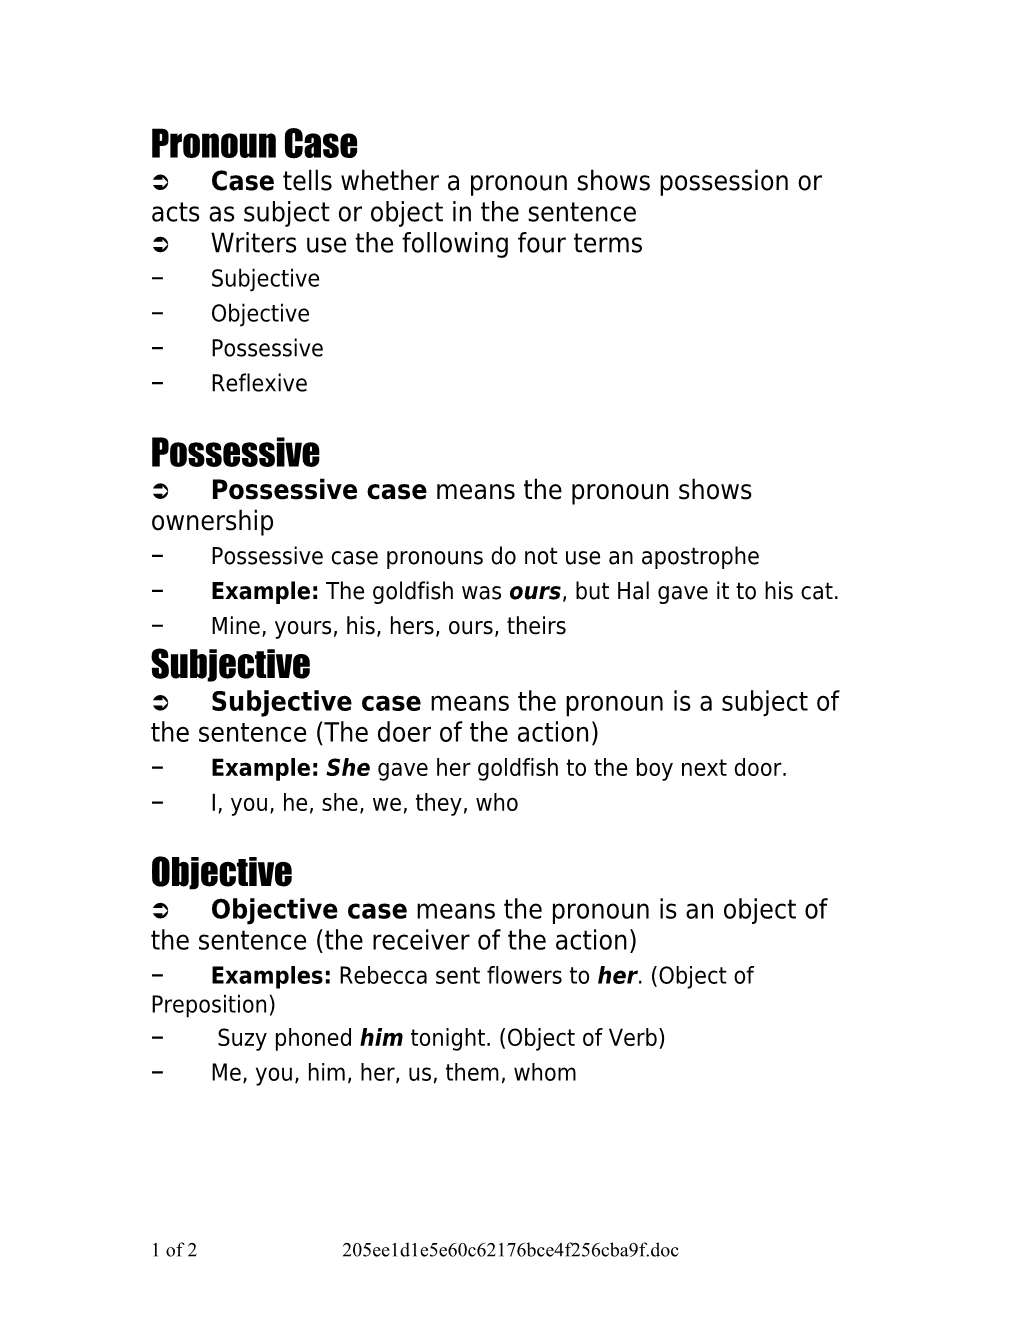 Ü Case Tells Whether a Pronoun Shows Possession Or Acts As Subject Or Object in the Sentence